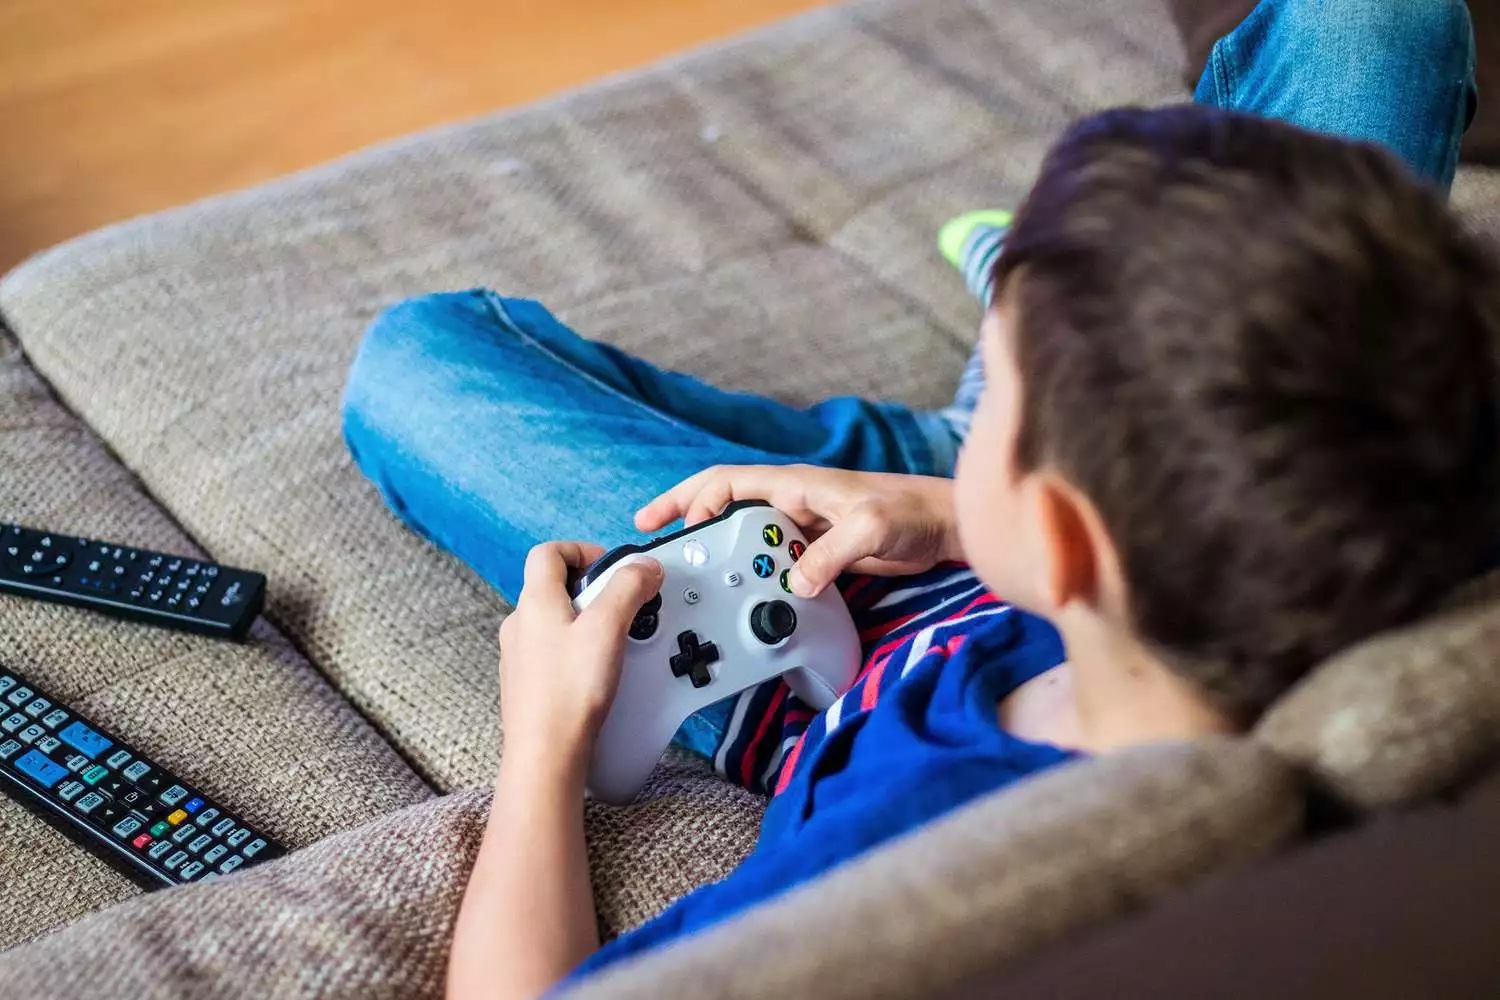 The Impact of Gaming on Children's Education and Development